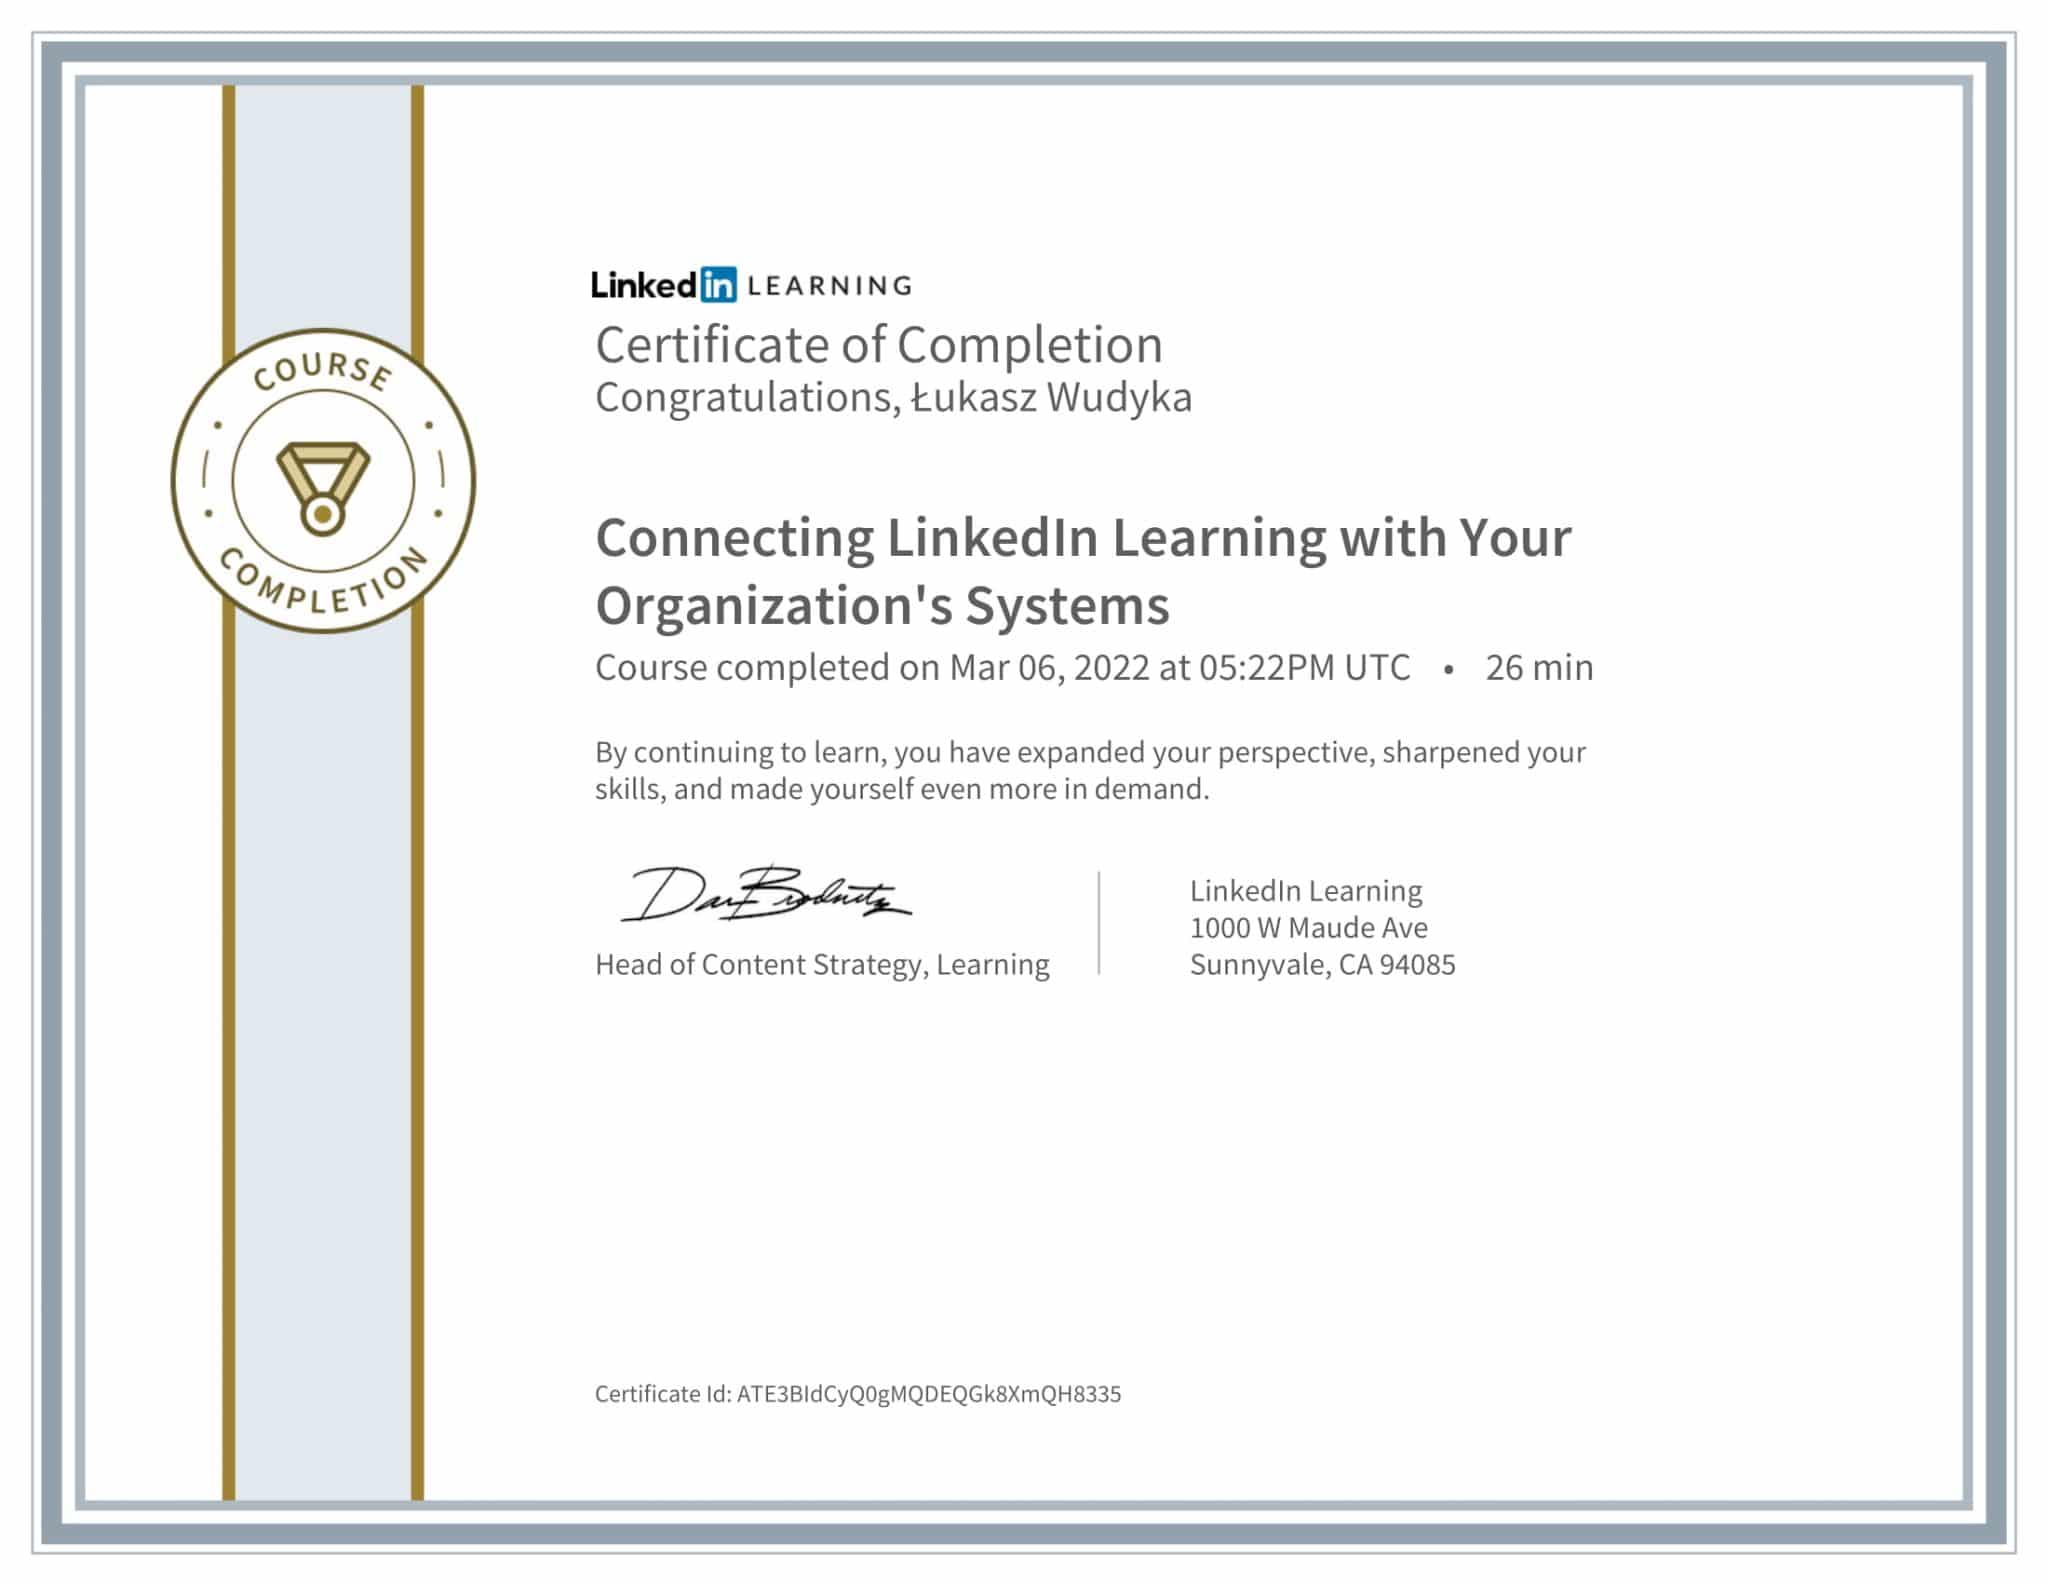 CertificateOfCompletion_Connecting LinkedIn Learning with Your Organizations Systems-1